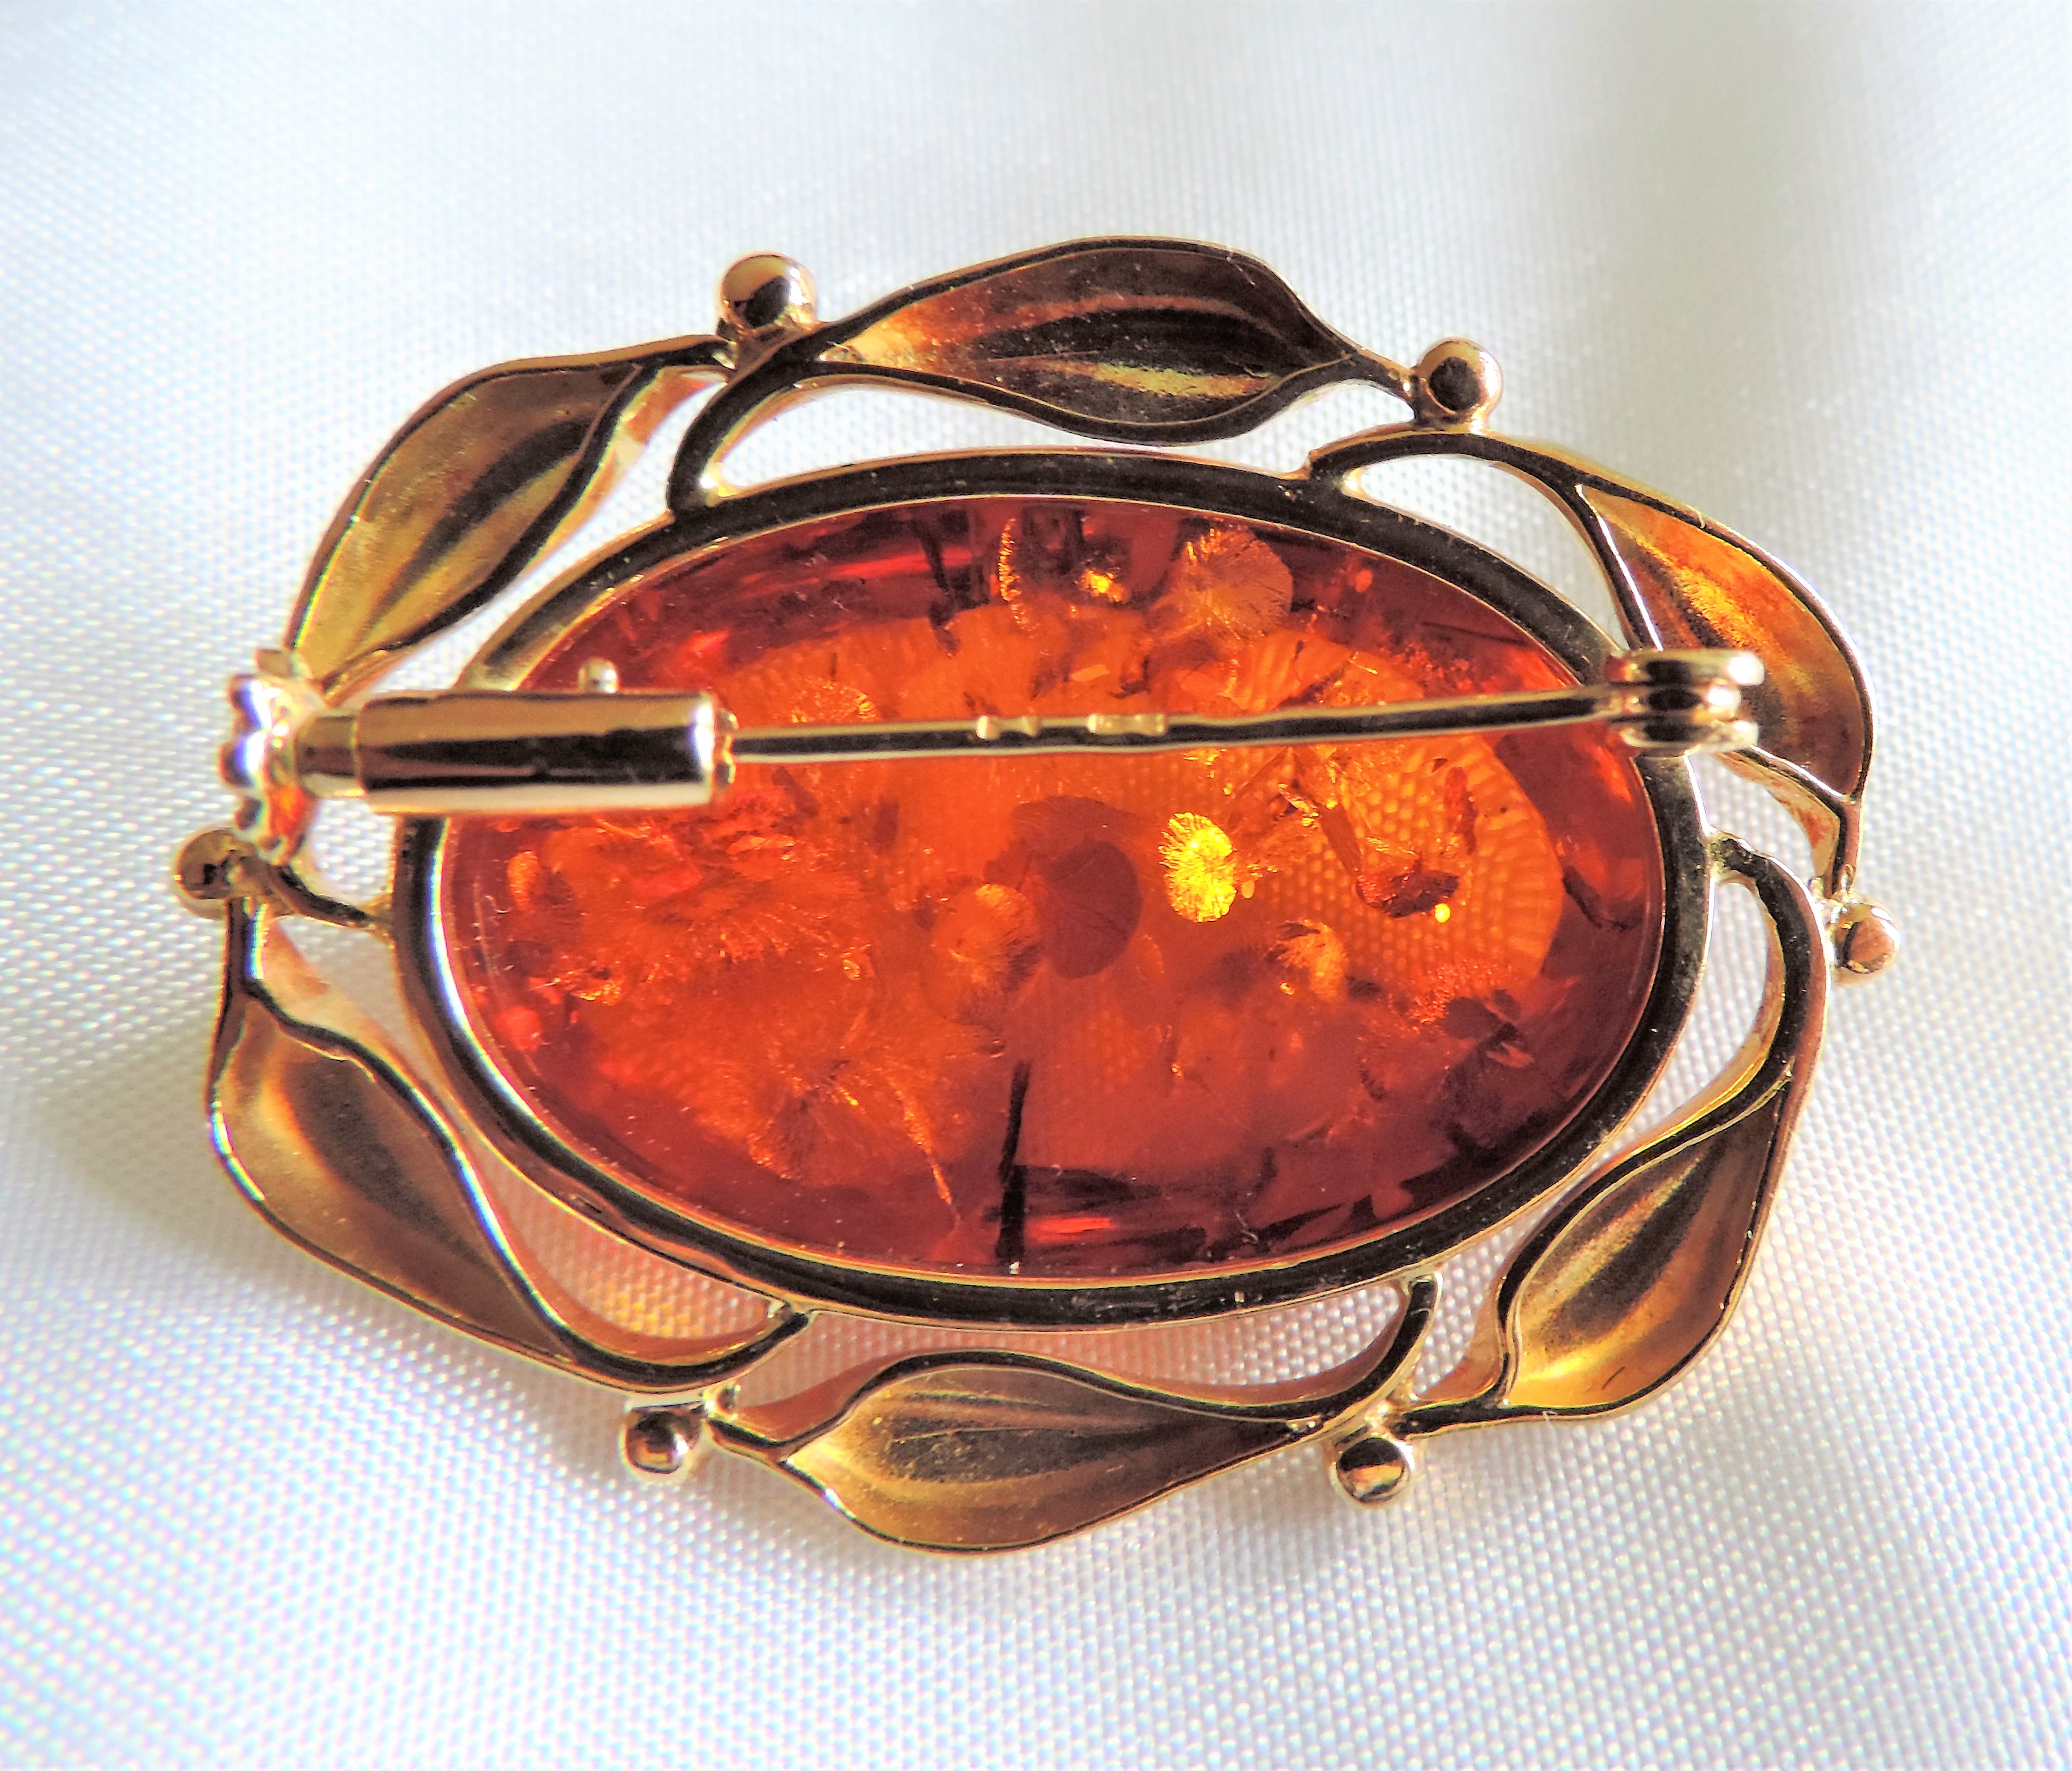 14k Solid Gold Baltic Amber Brooch - Amber 30mm x 20mm - Image 5 of 6